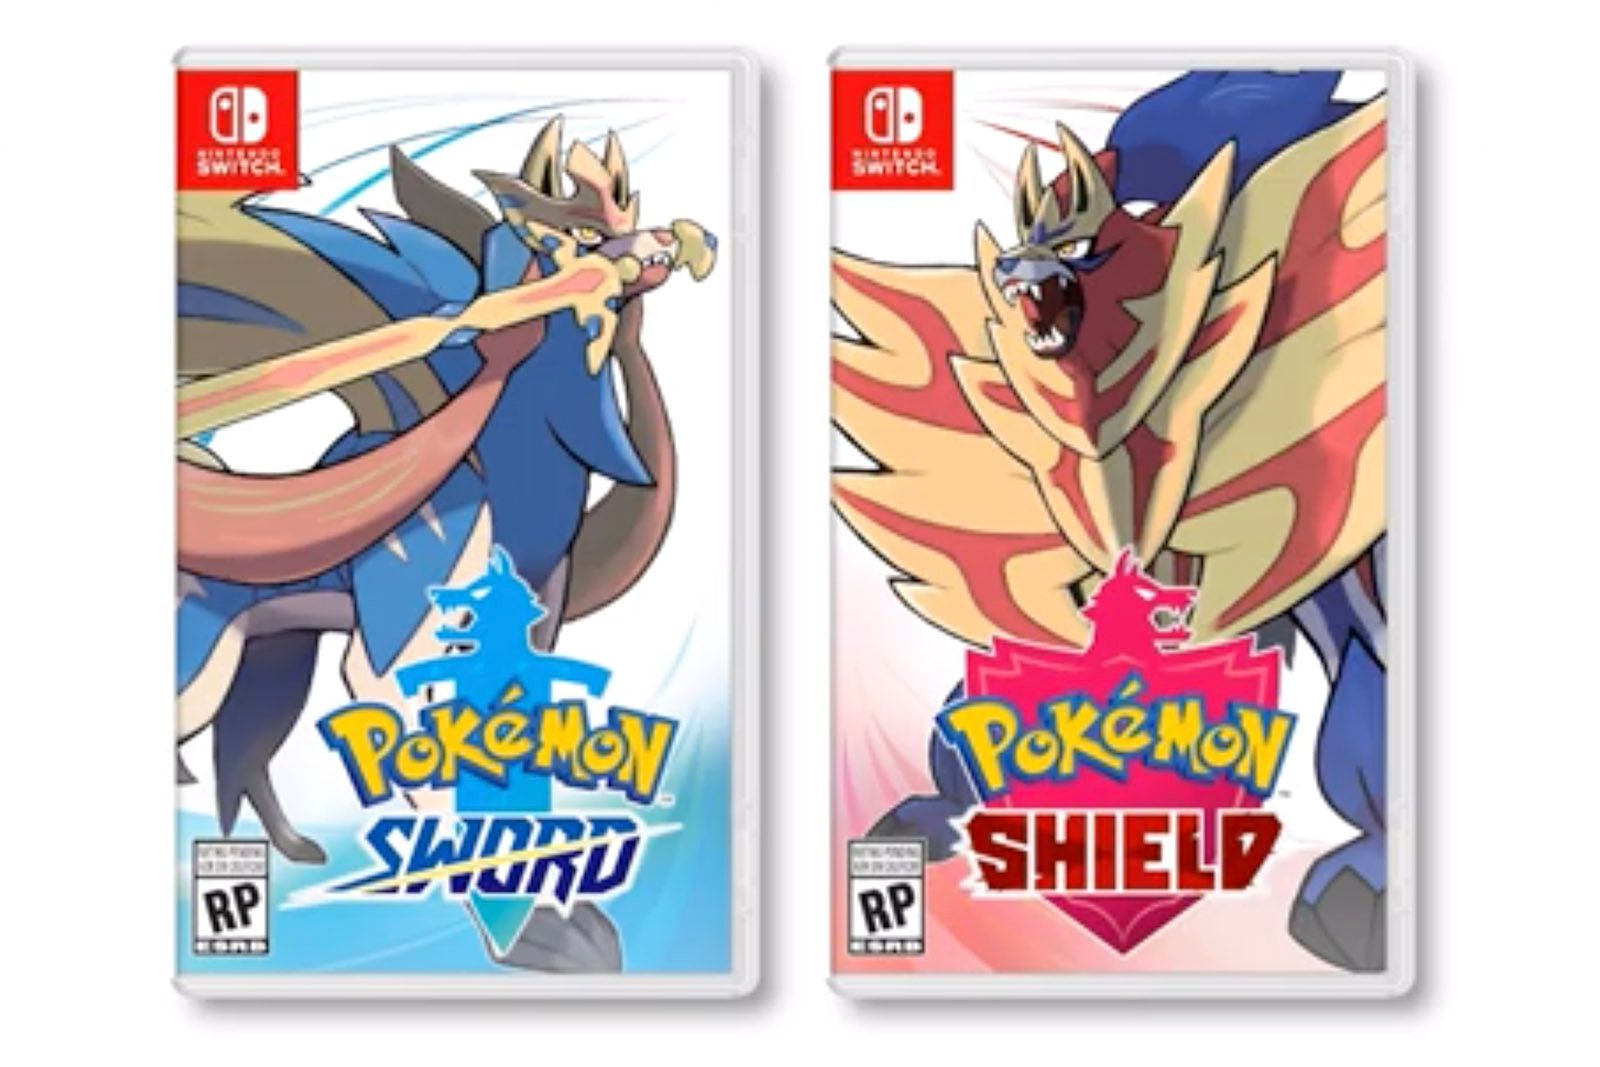 Pokemon Sword and Shield NIntendo Switch release date revealed image 1